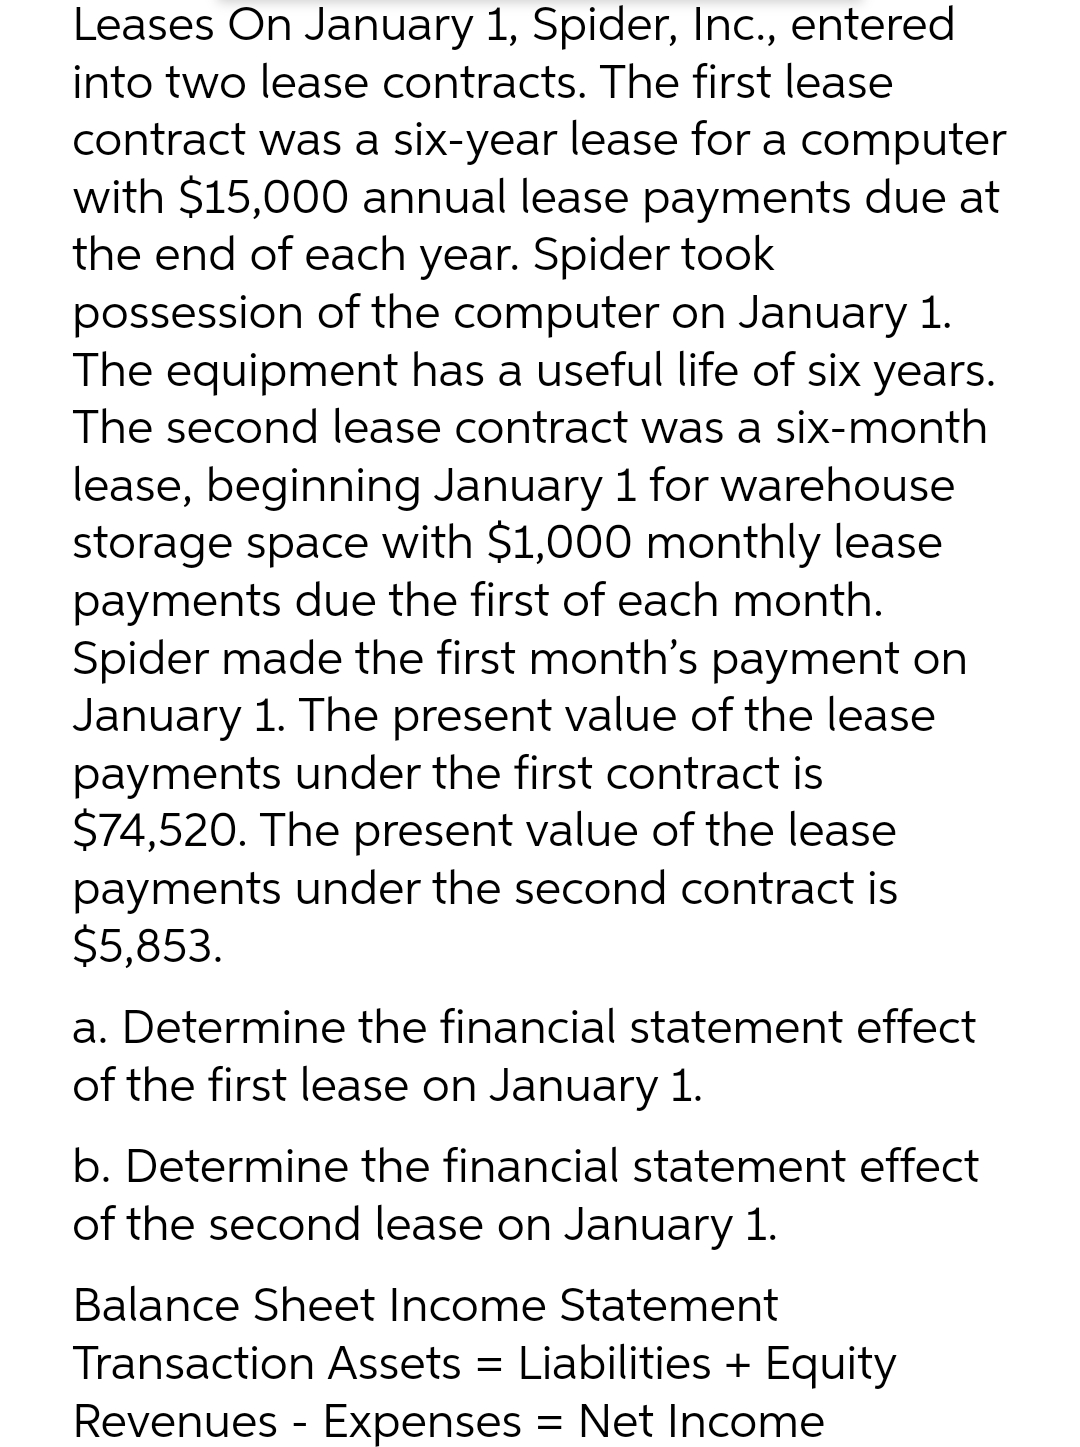 Leases On January 1, Spider, Inc., entered
into two lease contracts. The first lease
contract was a six-year lease for a computer
with $15,000 annual lease payments due at
the end of each year. Spider took
possession of the computer on January 1.
The equipment has a useful life of six years.
The second lease contract was a six-month
lease, beginning January 1 for warehouse
storage space with $1,000 monthly lease
payments due the first of each month.
Spider made the first month's payment on
January 1. The present value of the lease
payments under the first contract is
$74,520. The present value of the lease
payments under the second contract is
$5,853.
a. Determine the financial statement effect
of the first lease on January 1.
b. Determine the financial statement effect
of the second lease on January 1.
Balance Sheet Income Statement
Transaction Assets = Liabilities + Equity
Revenues - Expenses = Net Income